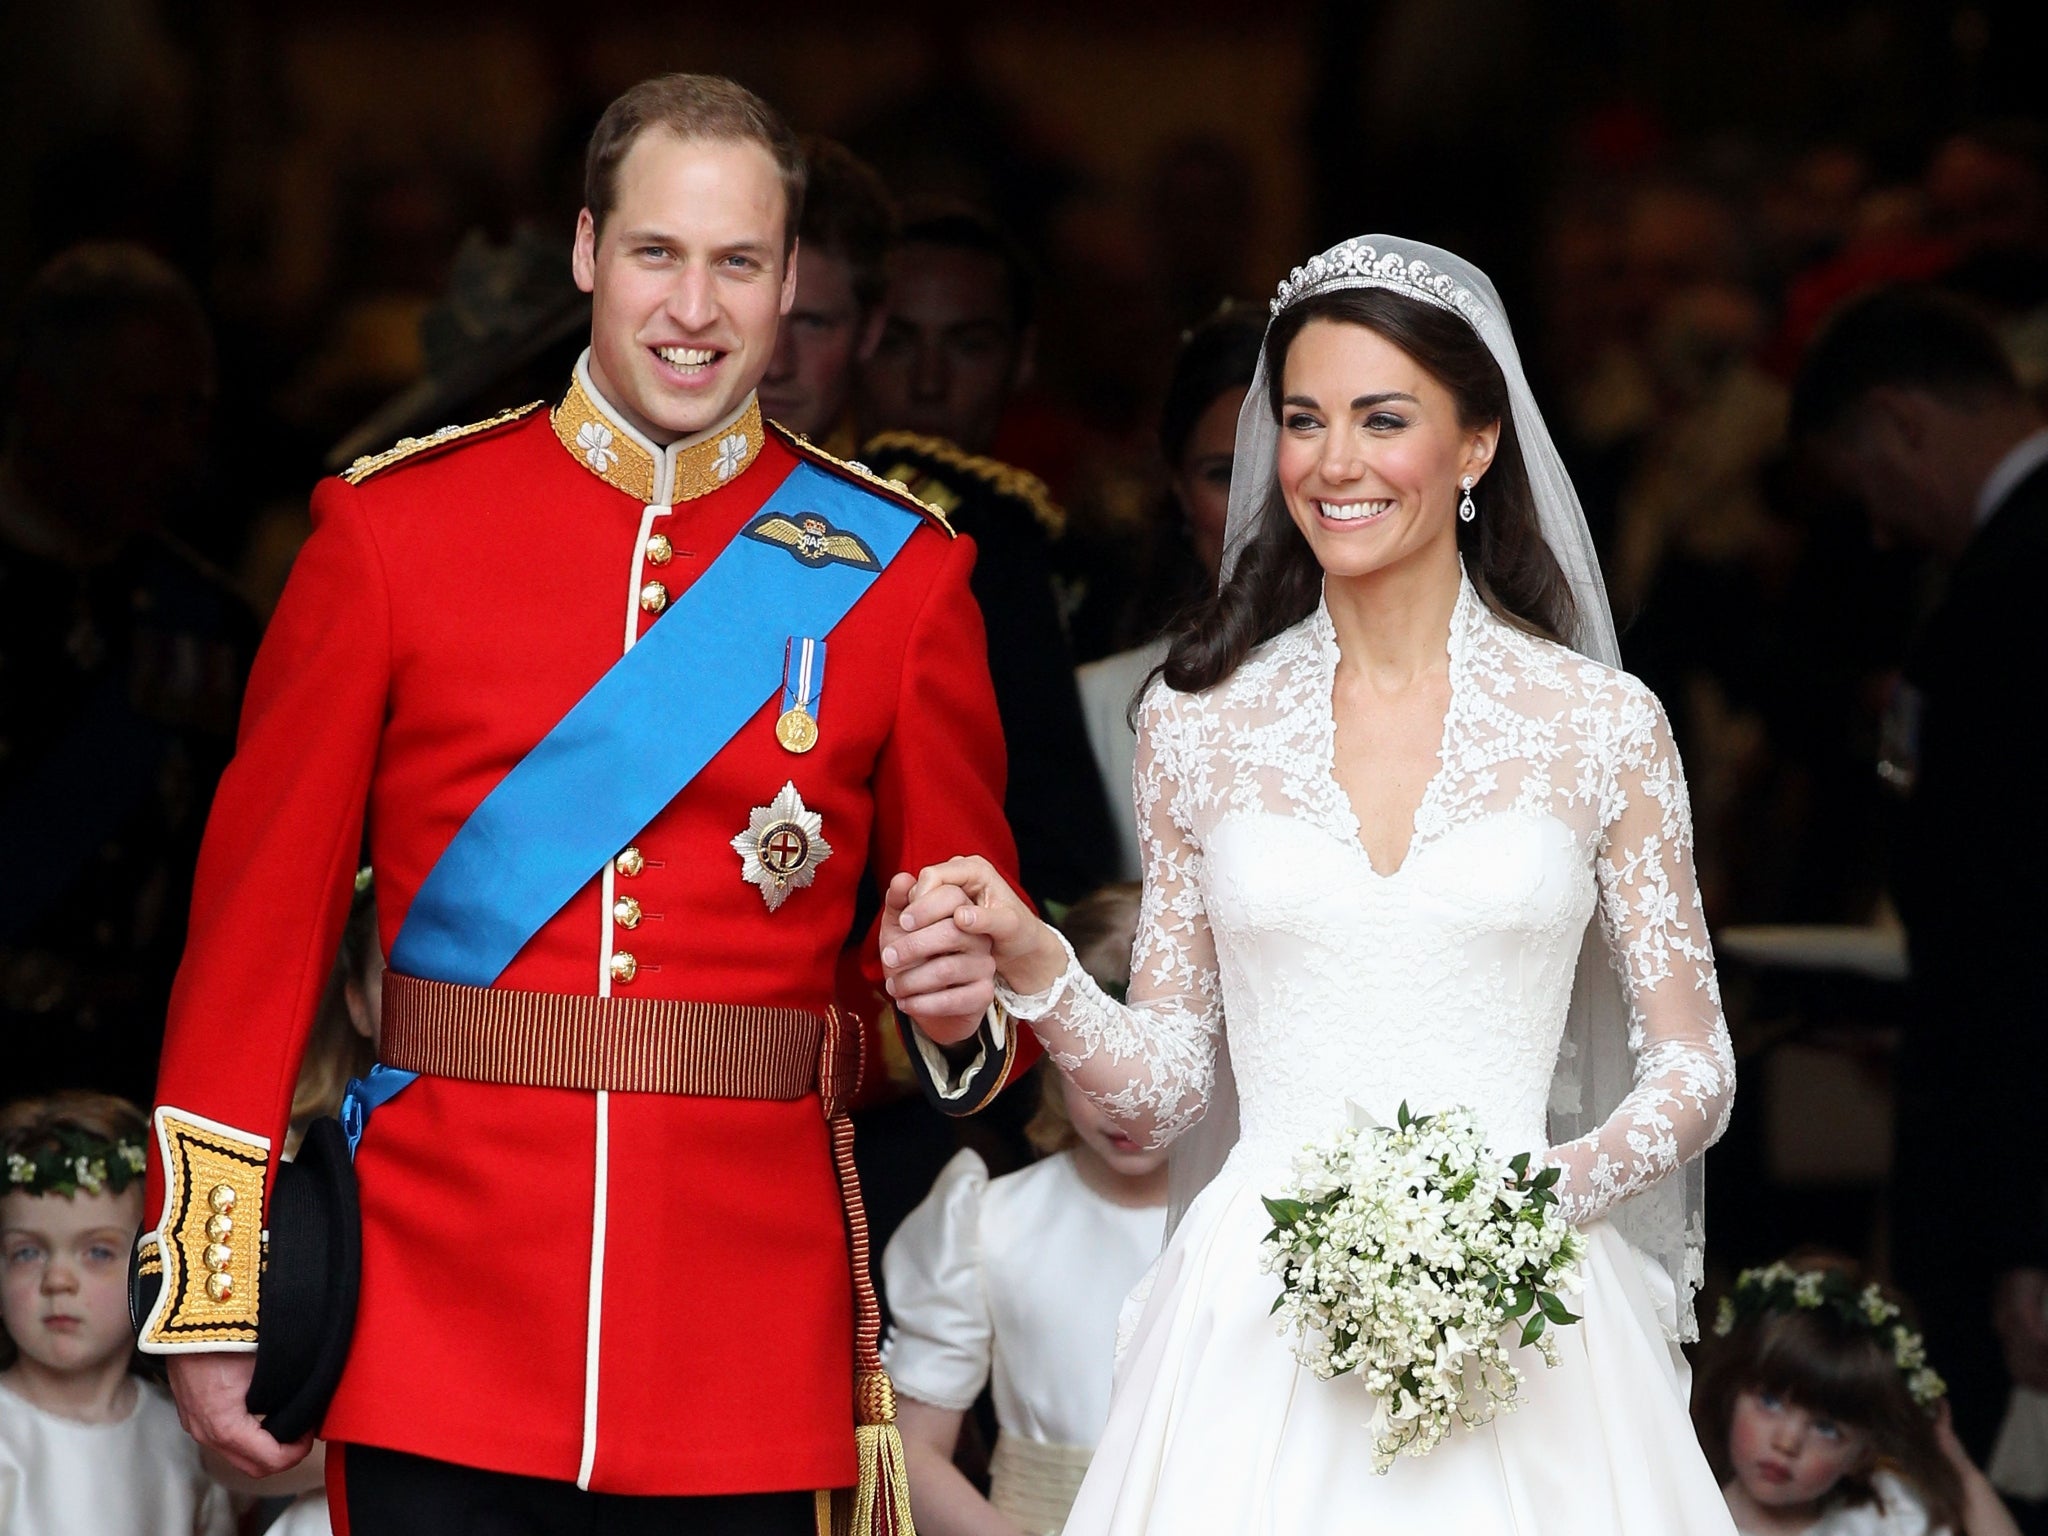 Prince William and Kate Middleton on their wedding day in 2011